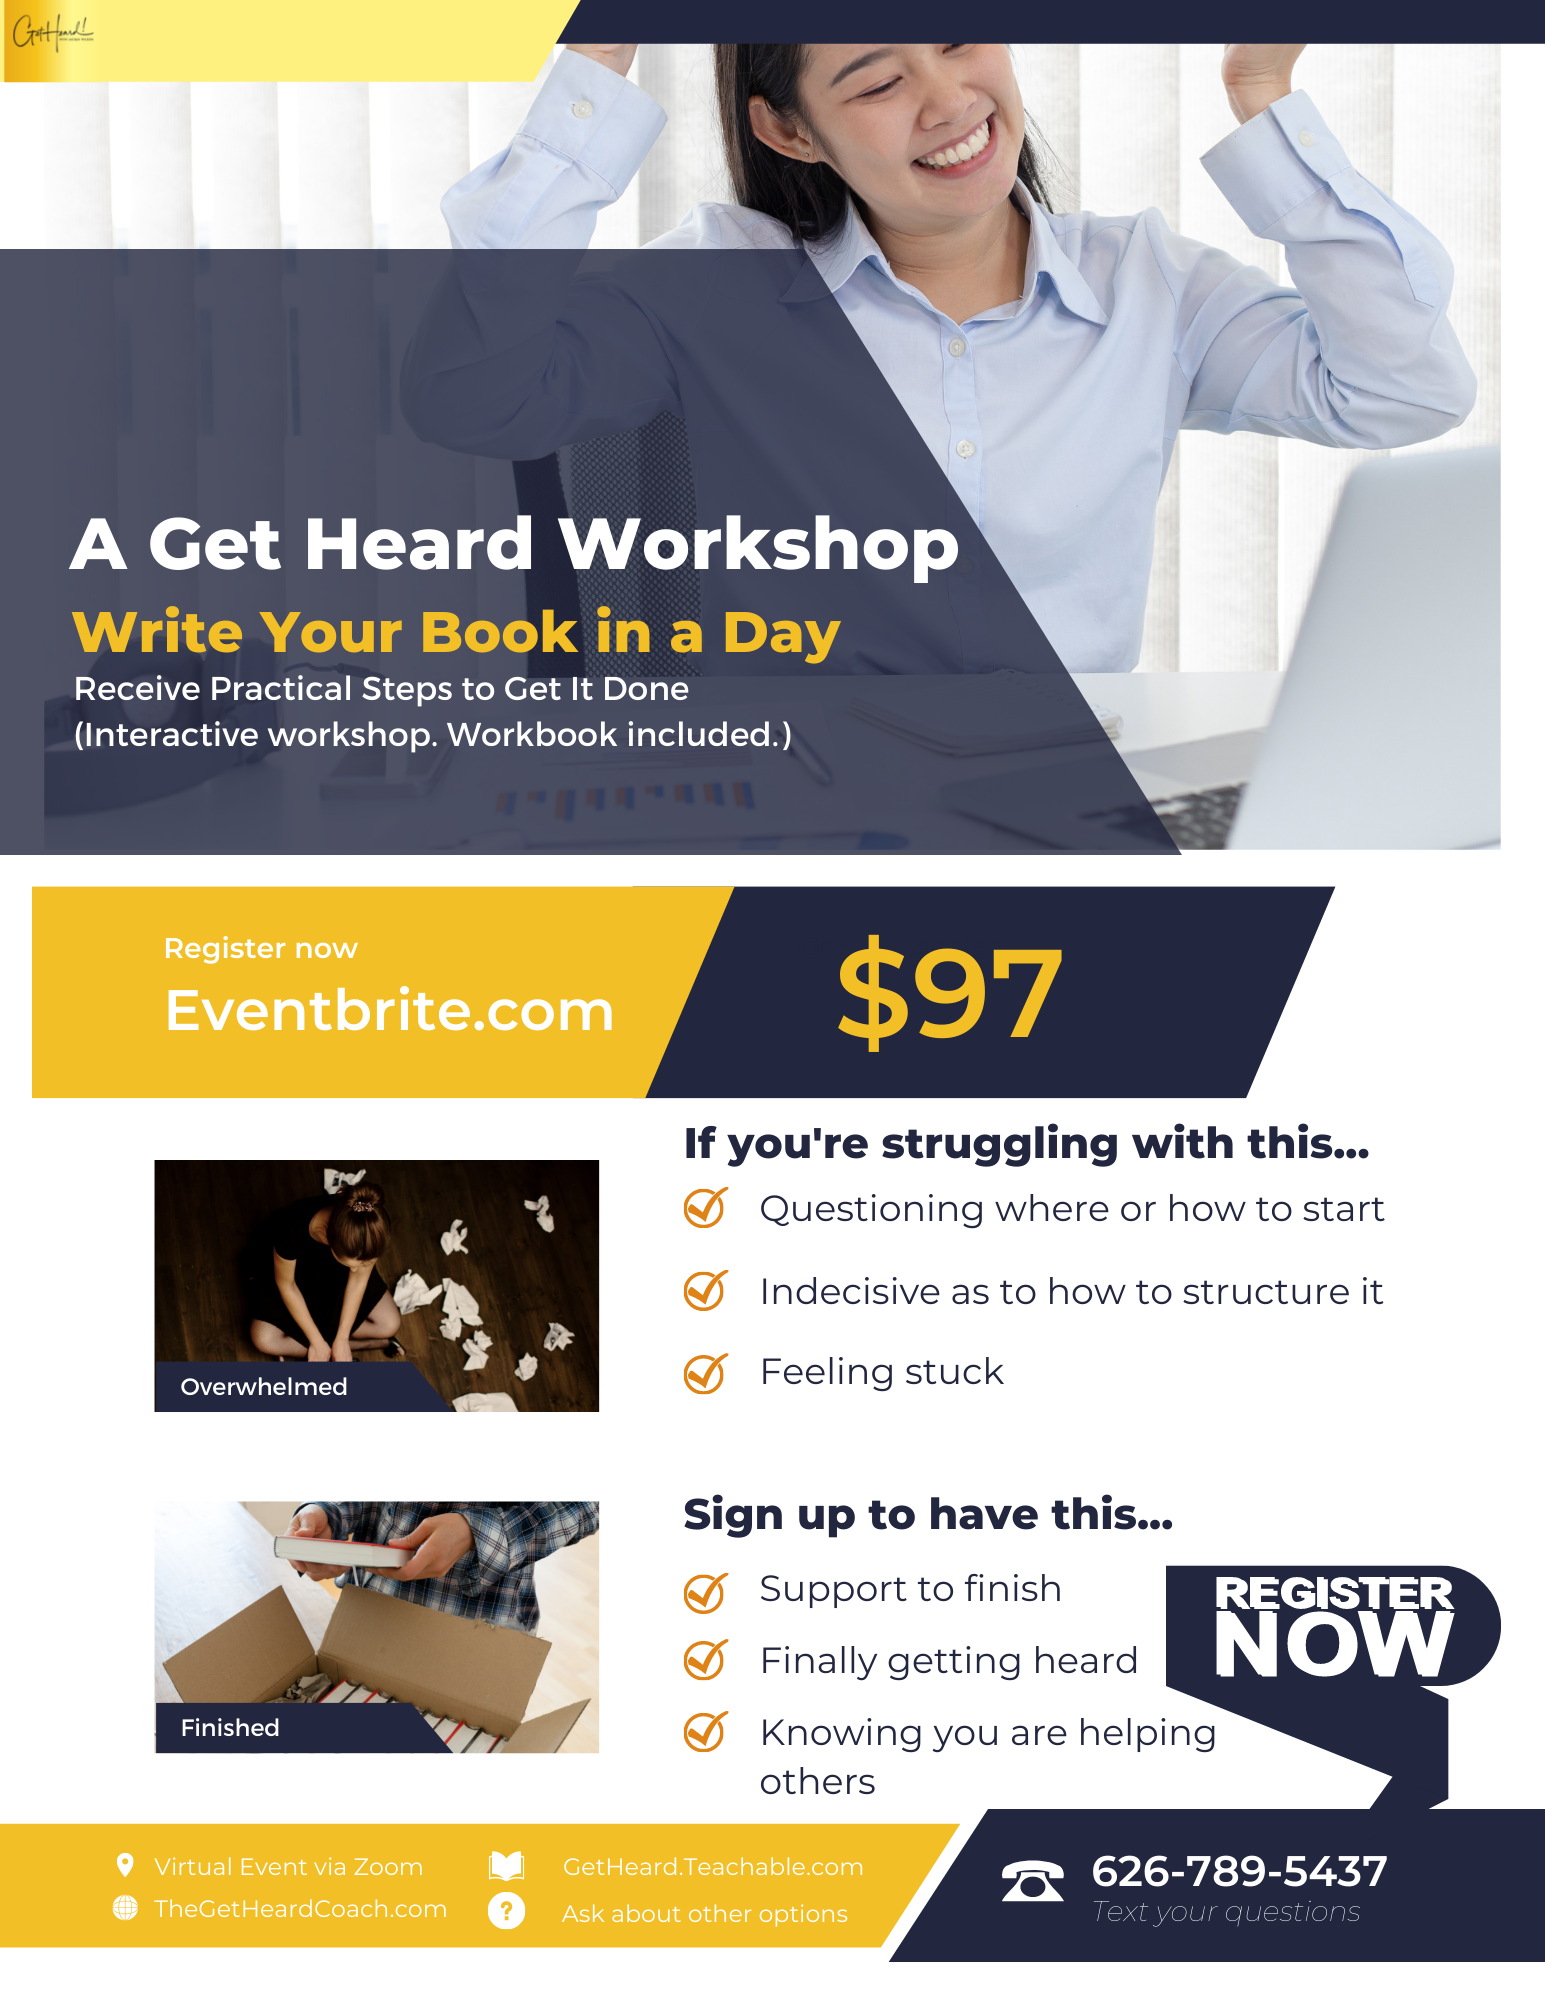 Workshop Write Your Book in a Day